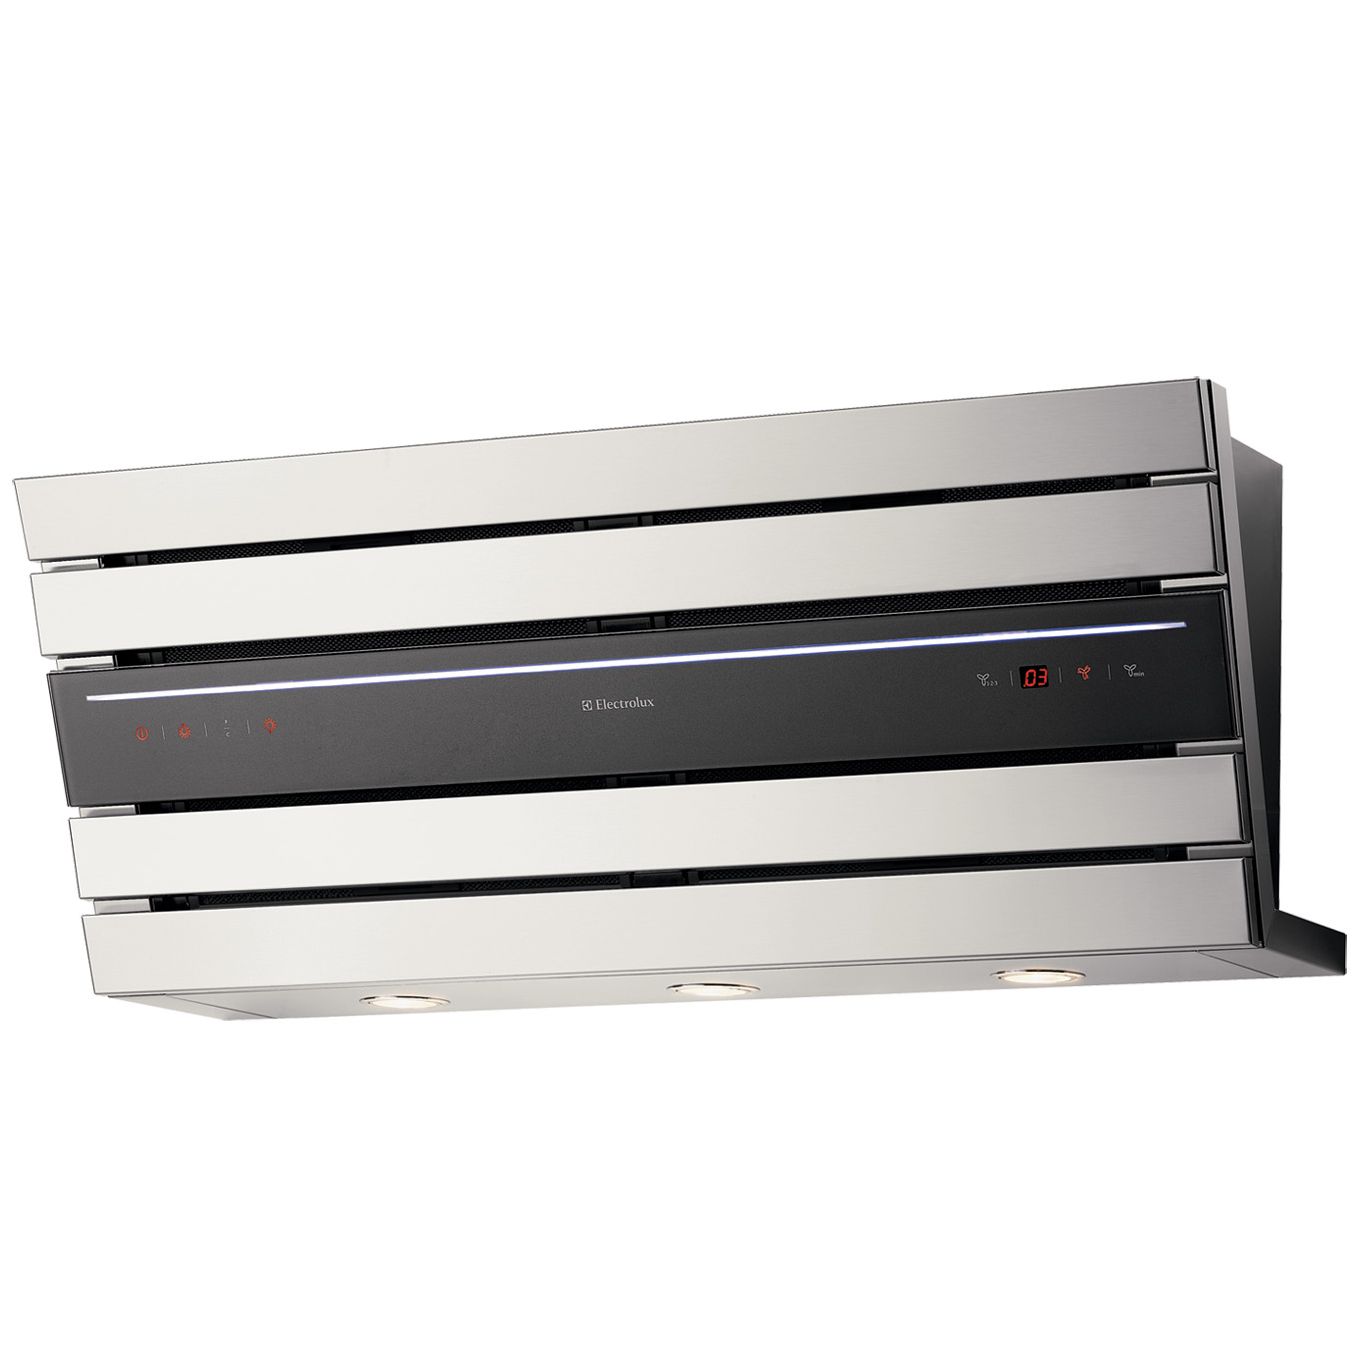 Electrolux EFC90680X Cooker Hood, Stainless Steel at JohnLewis